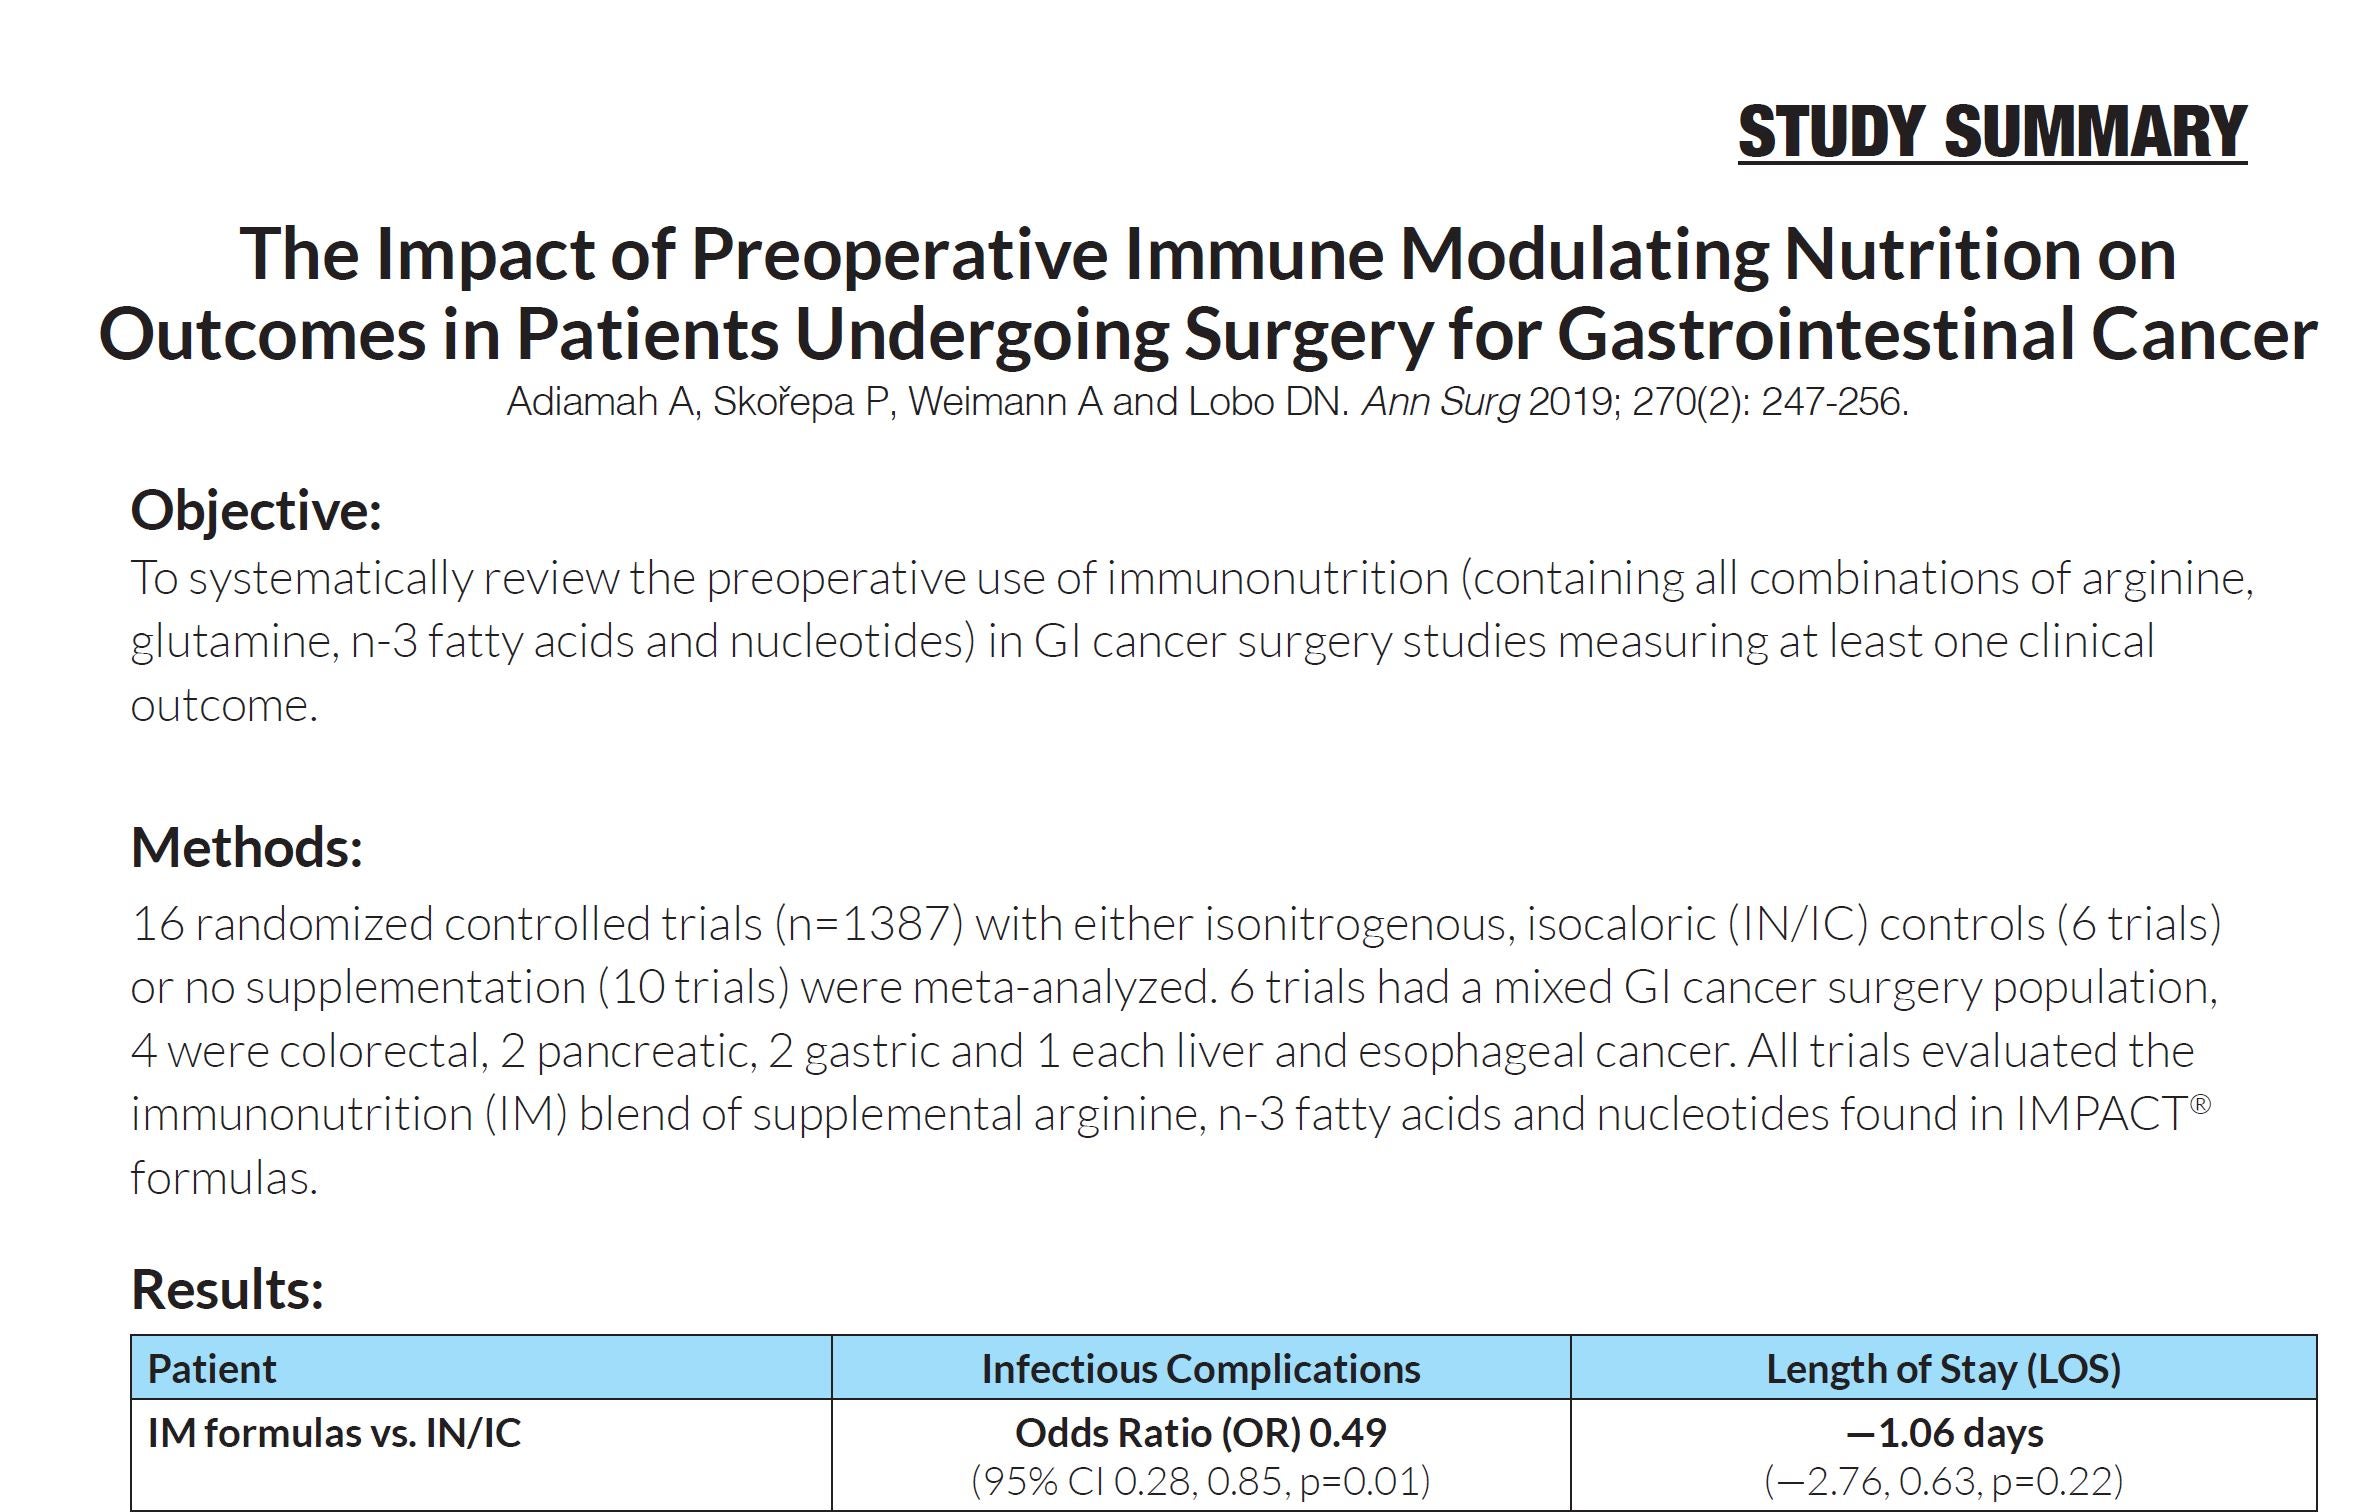 Adiamah-Impact of Preoperative immune Modulating Nutrition on Outcomes - GI Cancer Surgery